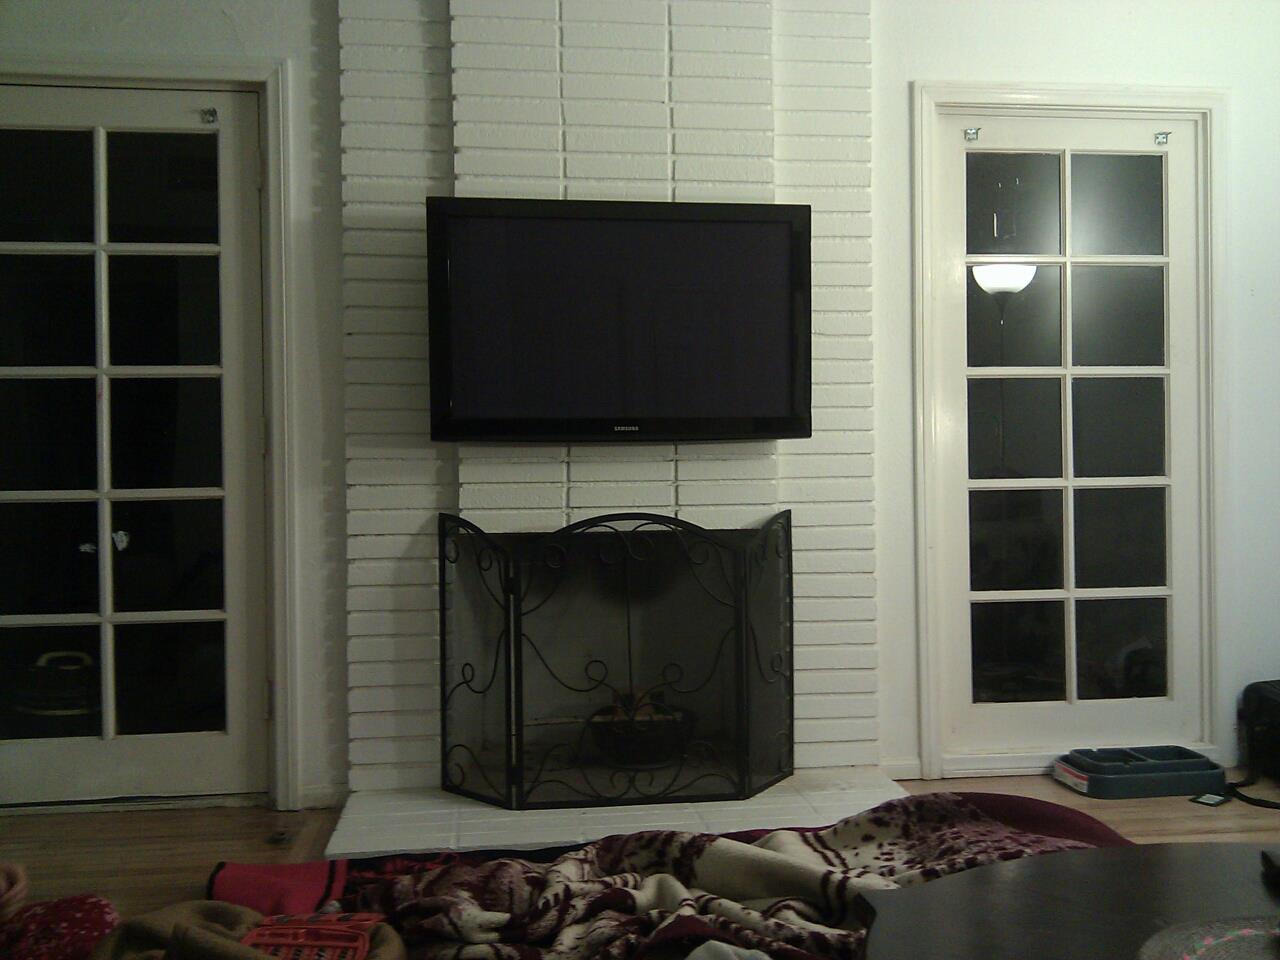 I just finished mounting the TV above the fireplace